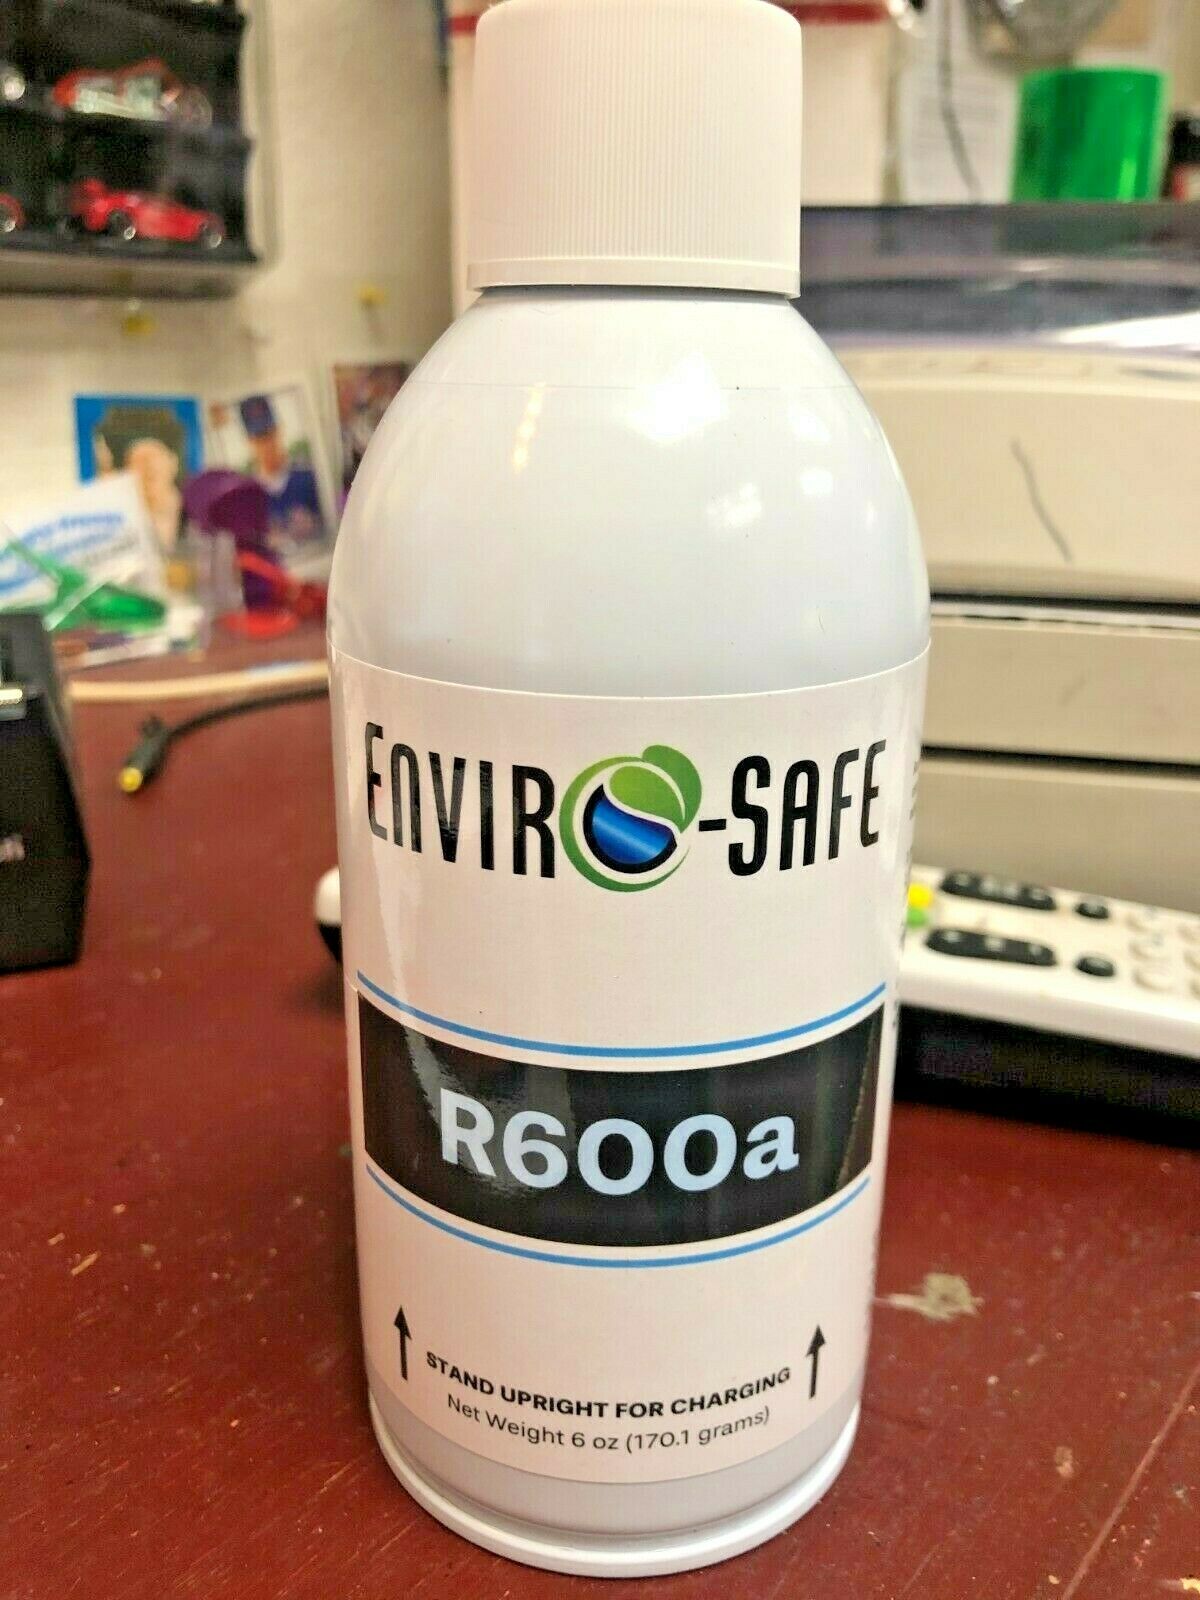 R600a, 6 Oz., New Upright For Liquid Can, Isobutane, Pharmaceutical Grade 99.7%